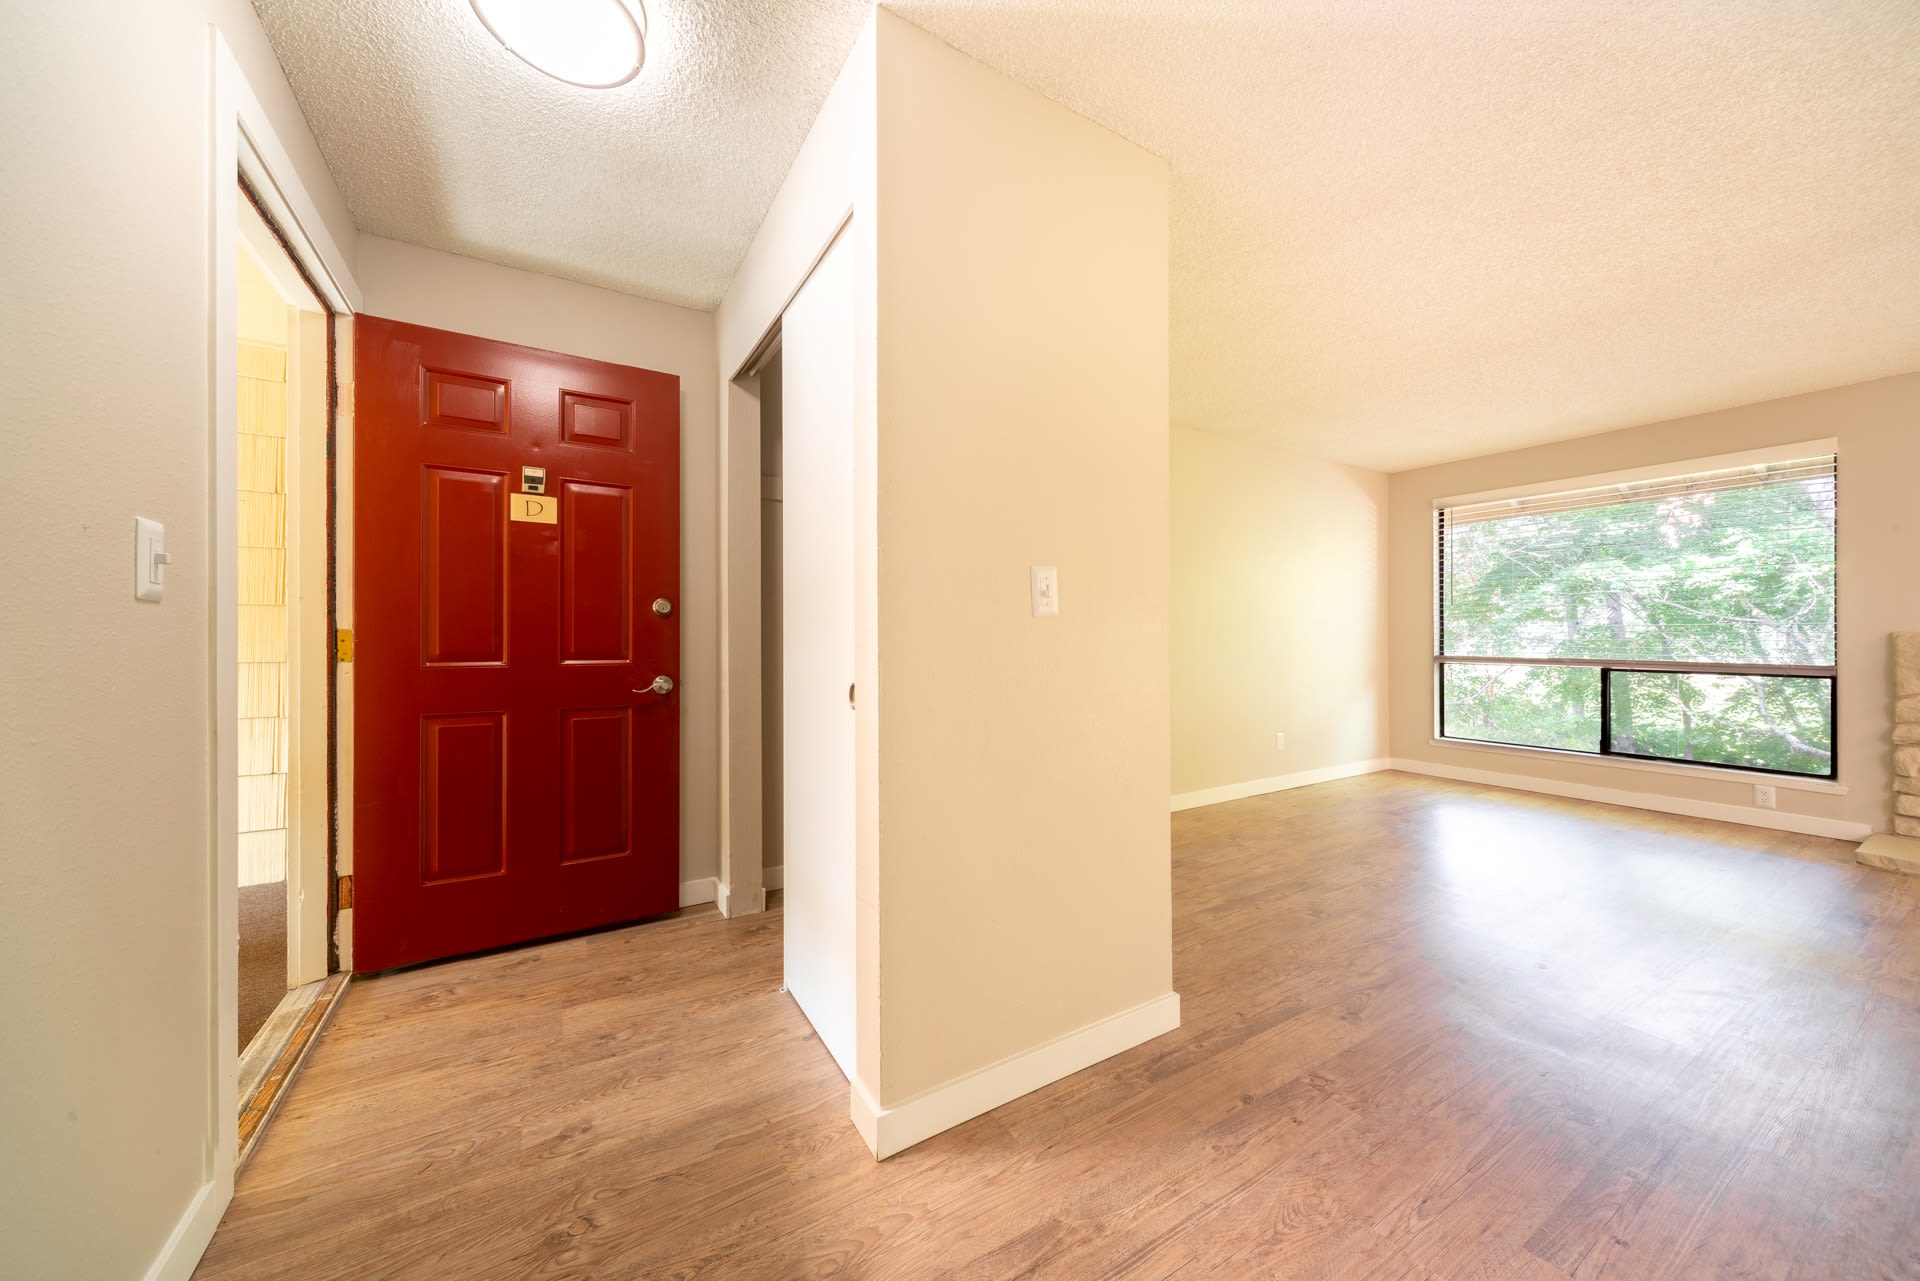 entry and view of living room at The Commons in Federal Way, Washington